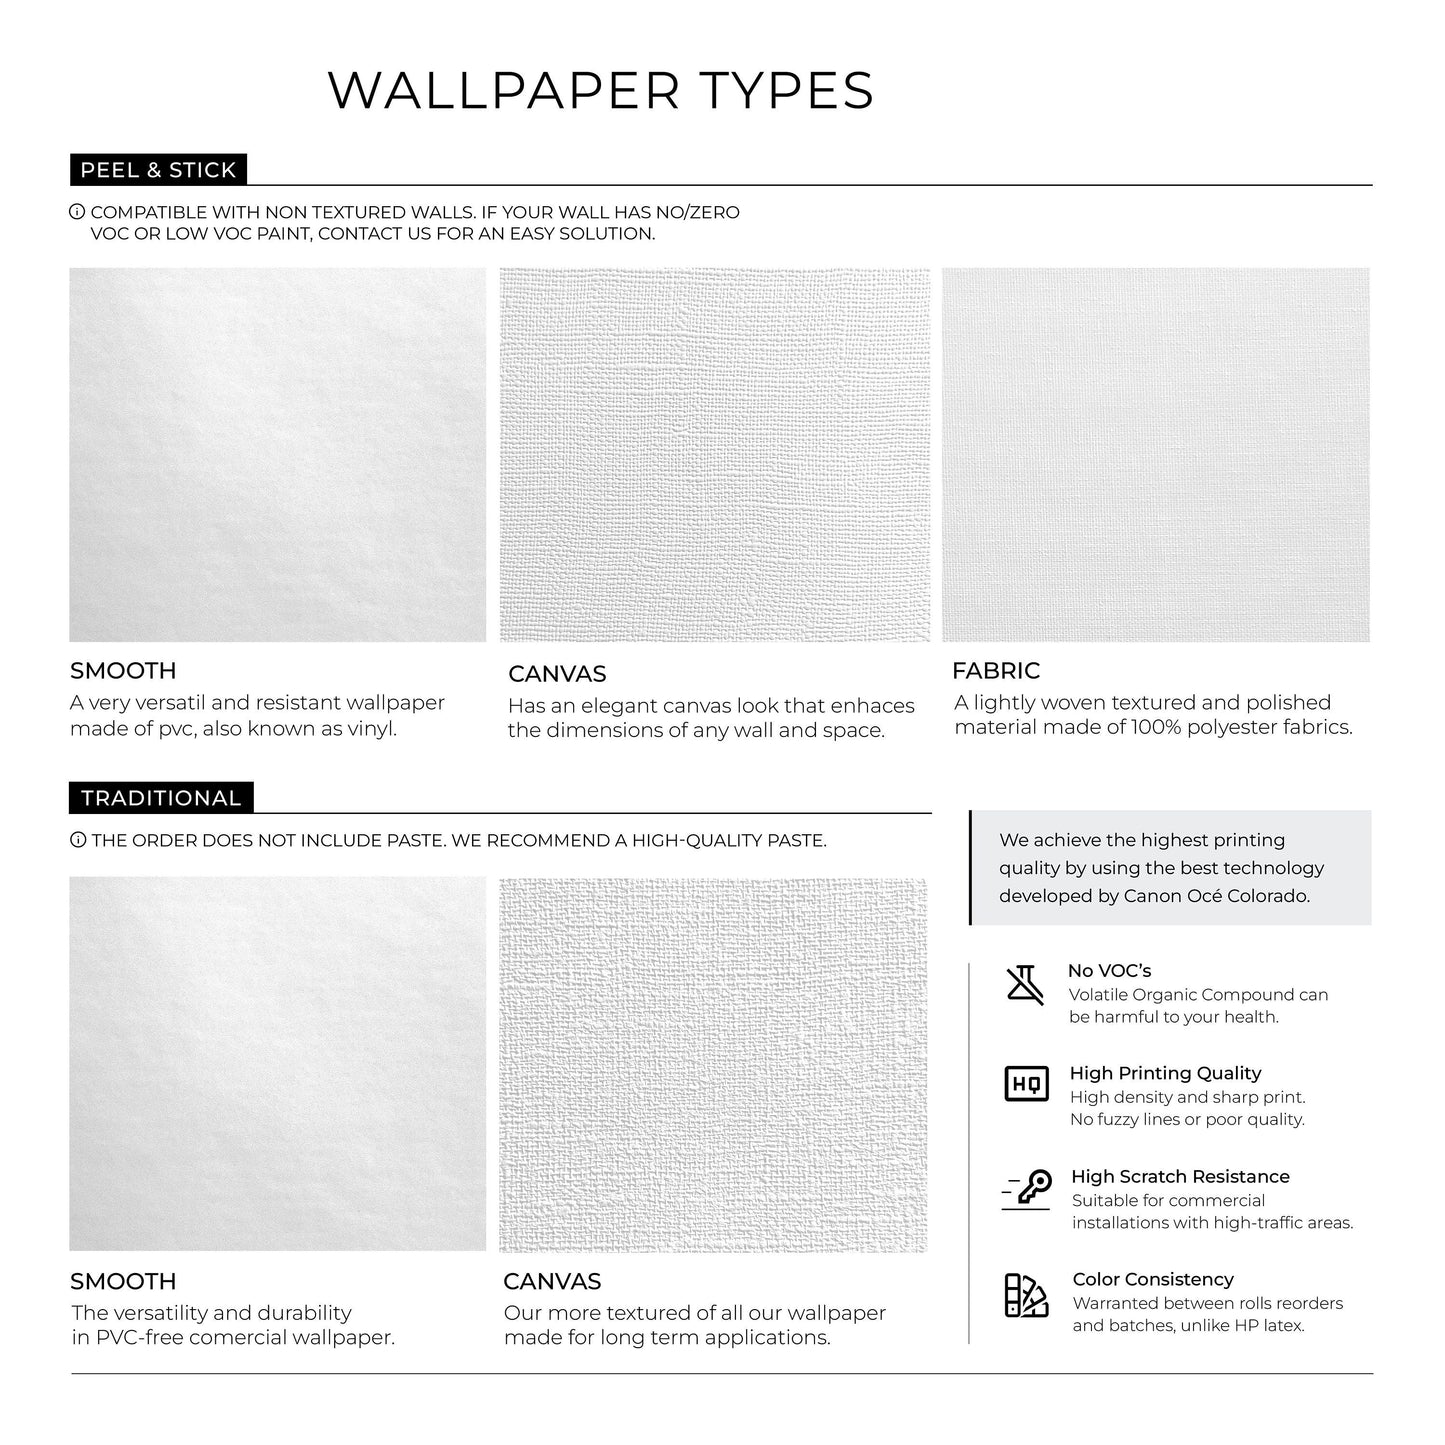 Black and Grey Line Art Mural Abstract Wallpaper Hand Drawing Wallpaper Peel and Stick Wallpaper Home Decor - D588